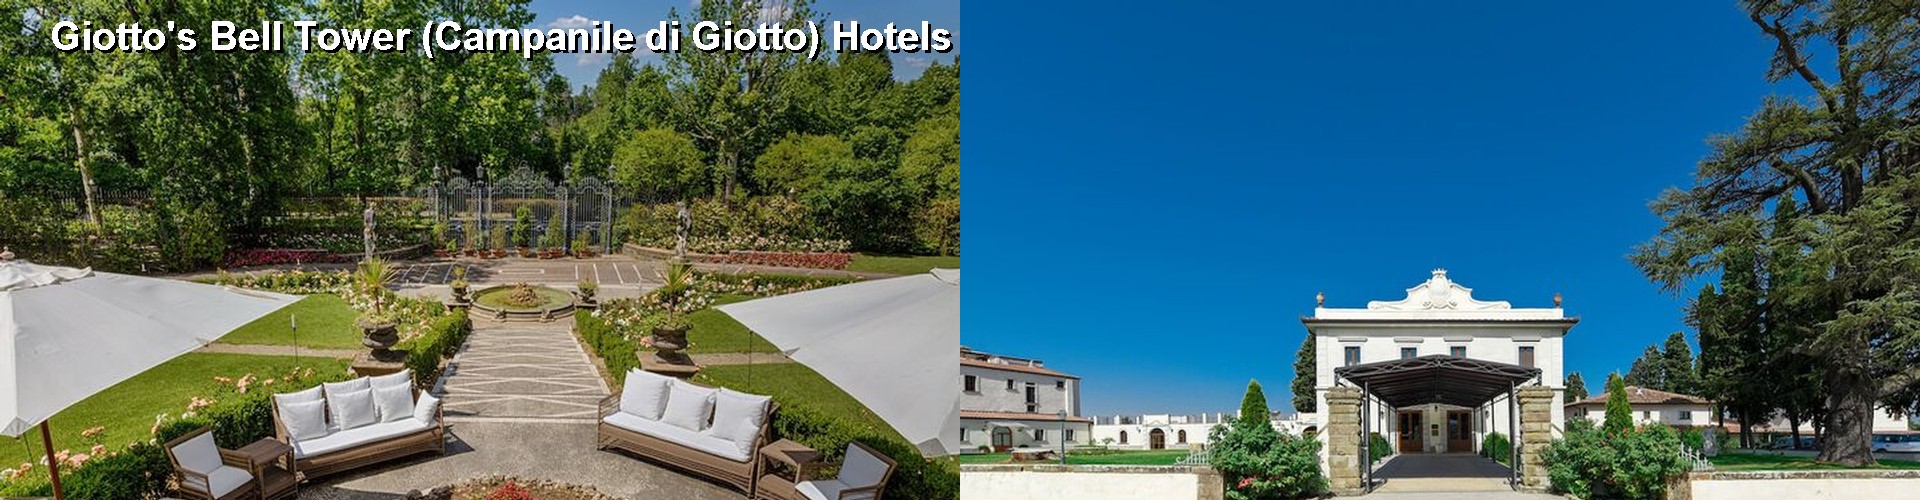 5 Best Hotels near Giotto's Bell Tower (Campanile di Giotto)